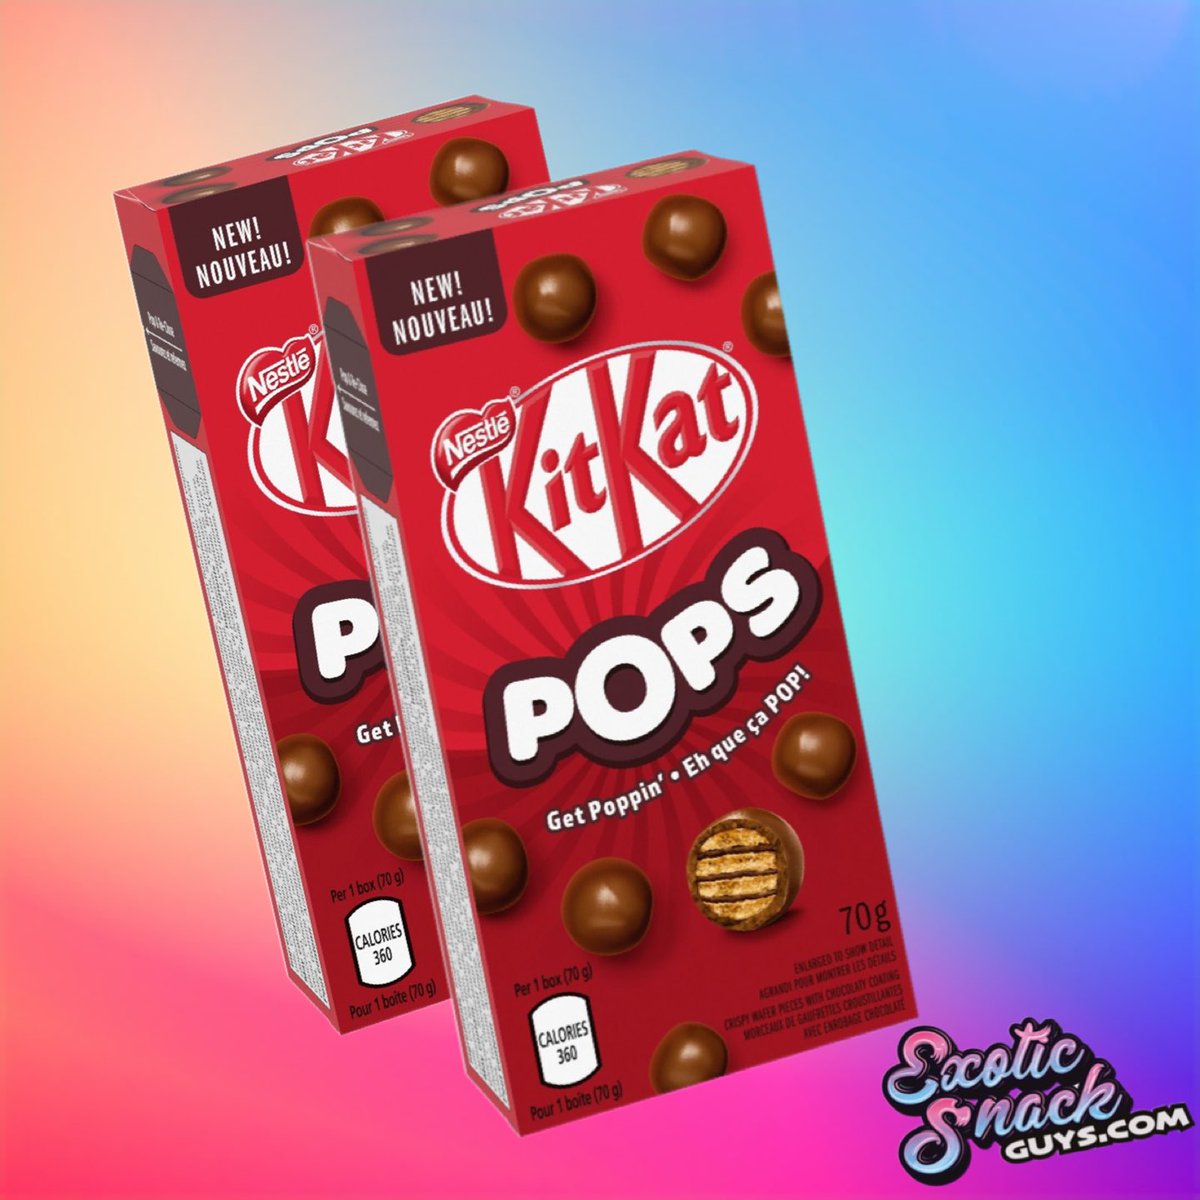 Have you tried KitKat Pops ?
#chicago #chicagogram #chicagobulls #chicagophotographer #chicagofood #chicagoland #insta_chicago #chicagoeats #park #lincoln #exoticsnacks #exoticssnacks #exoticsnackstagram #exoticsnackscanada #exoticsnackstoronto #exoticsnacksli #exoticsnackshop